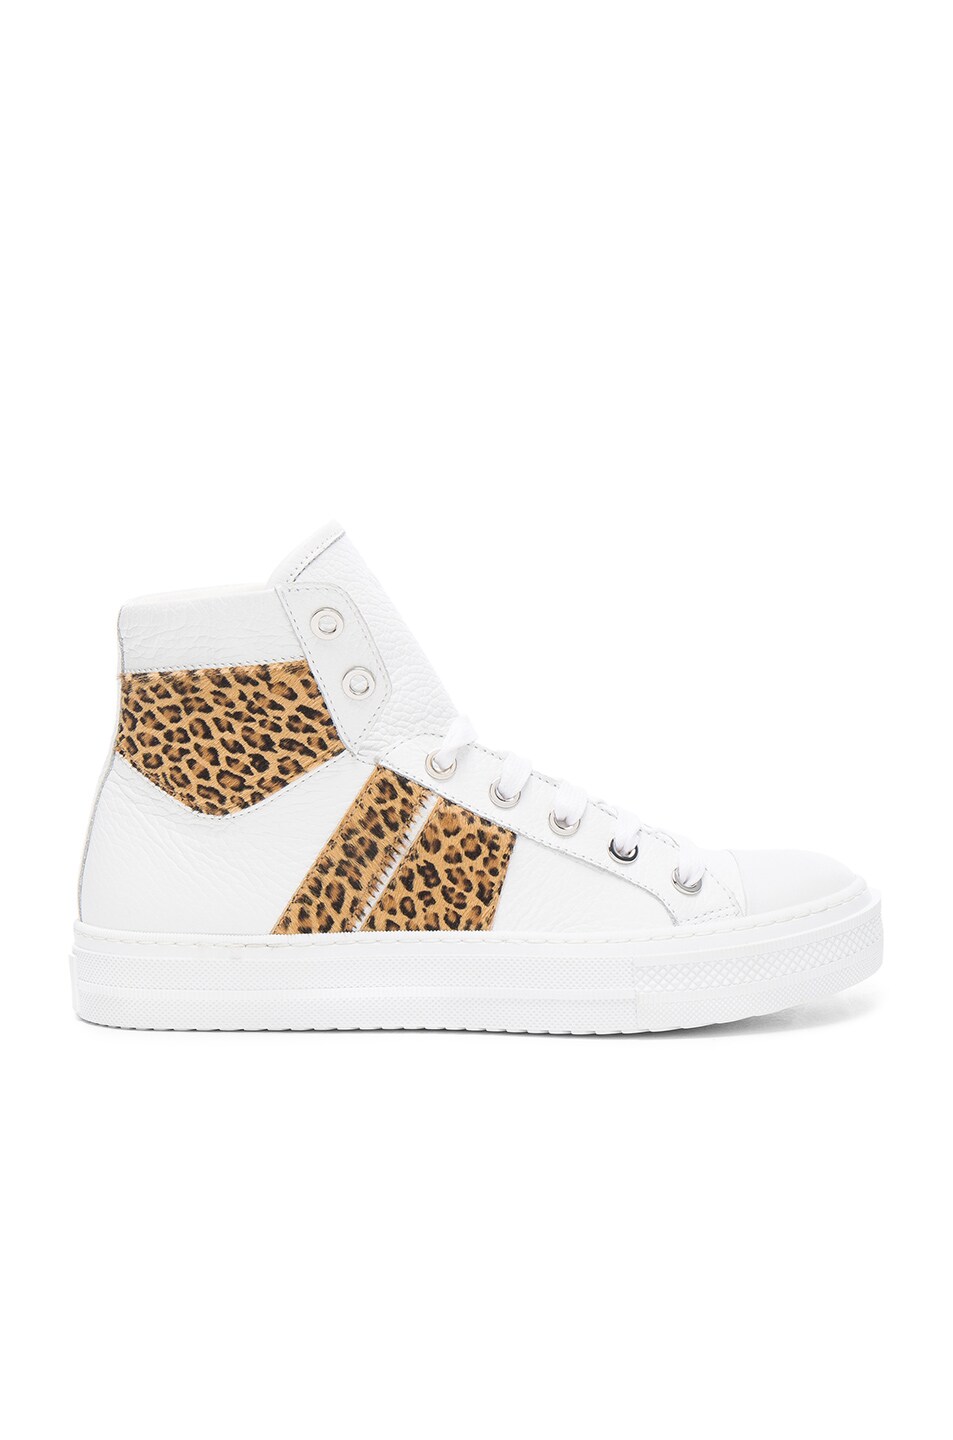 Image 1 of Amiri Leather & Calf Hair Sunset Sneakers in White & Leopard